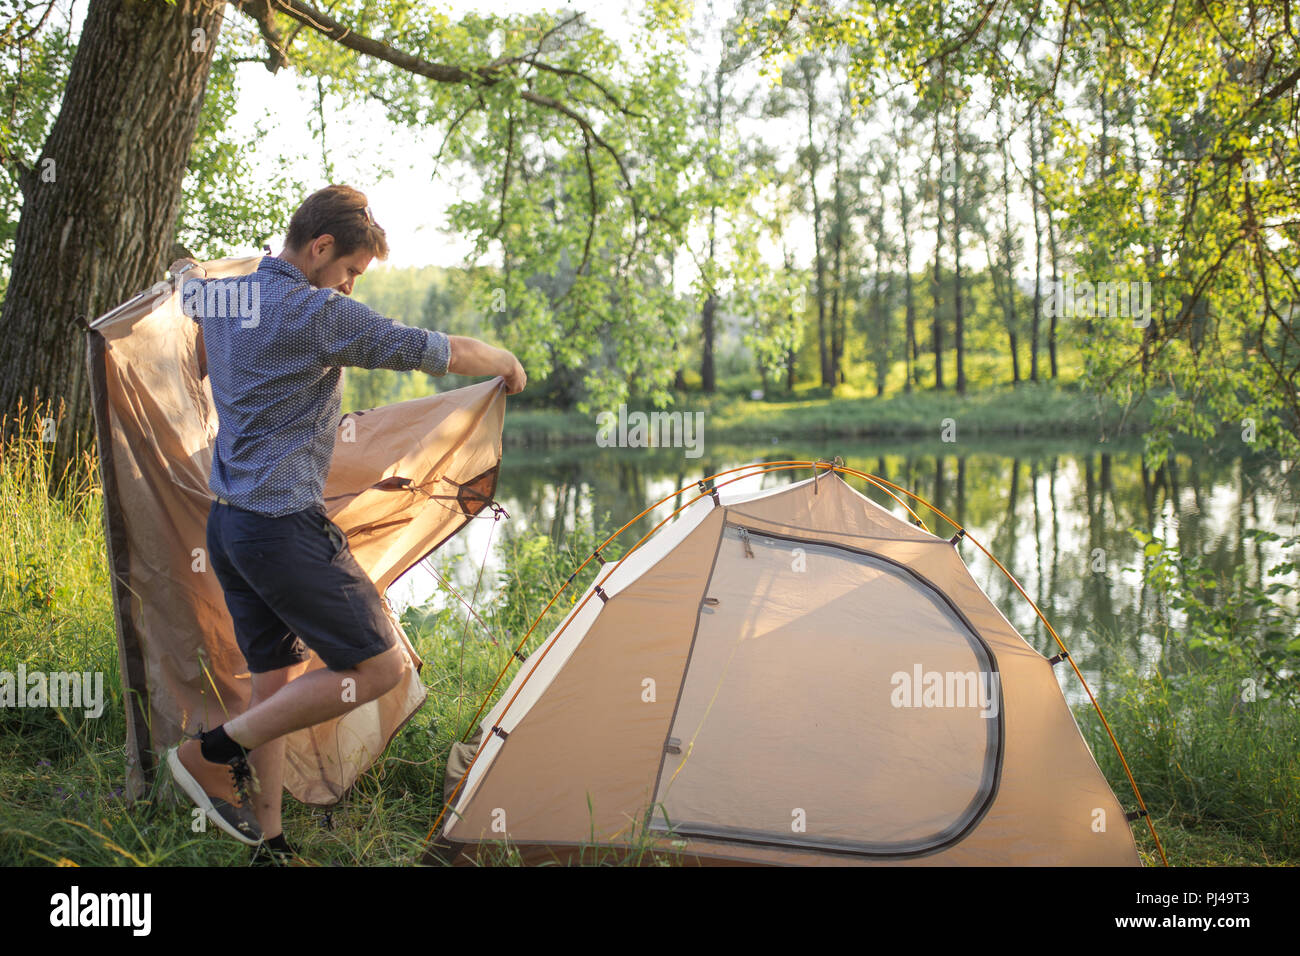 Young handsome man is putting up a tent Stock Photo